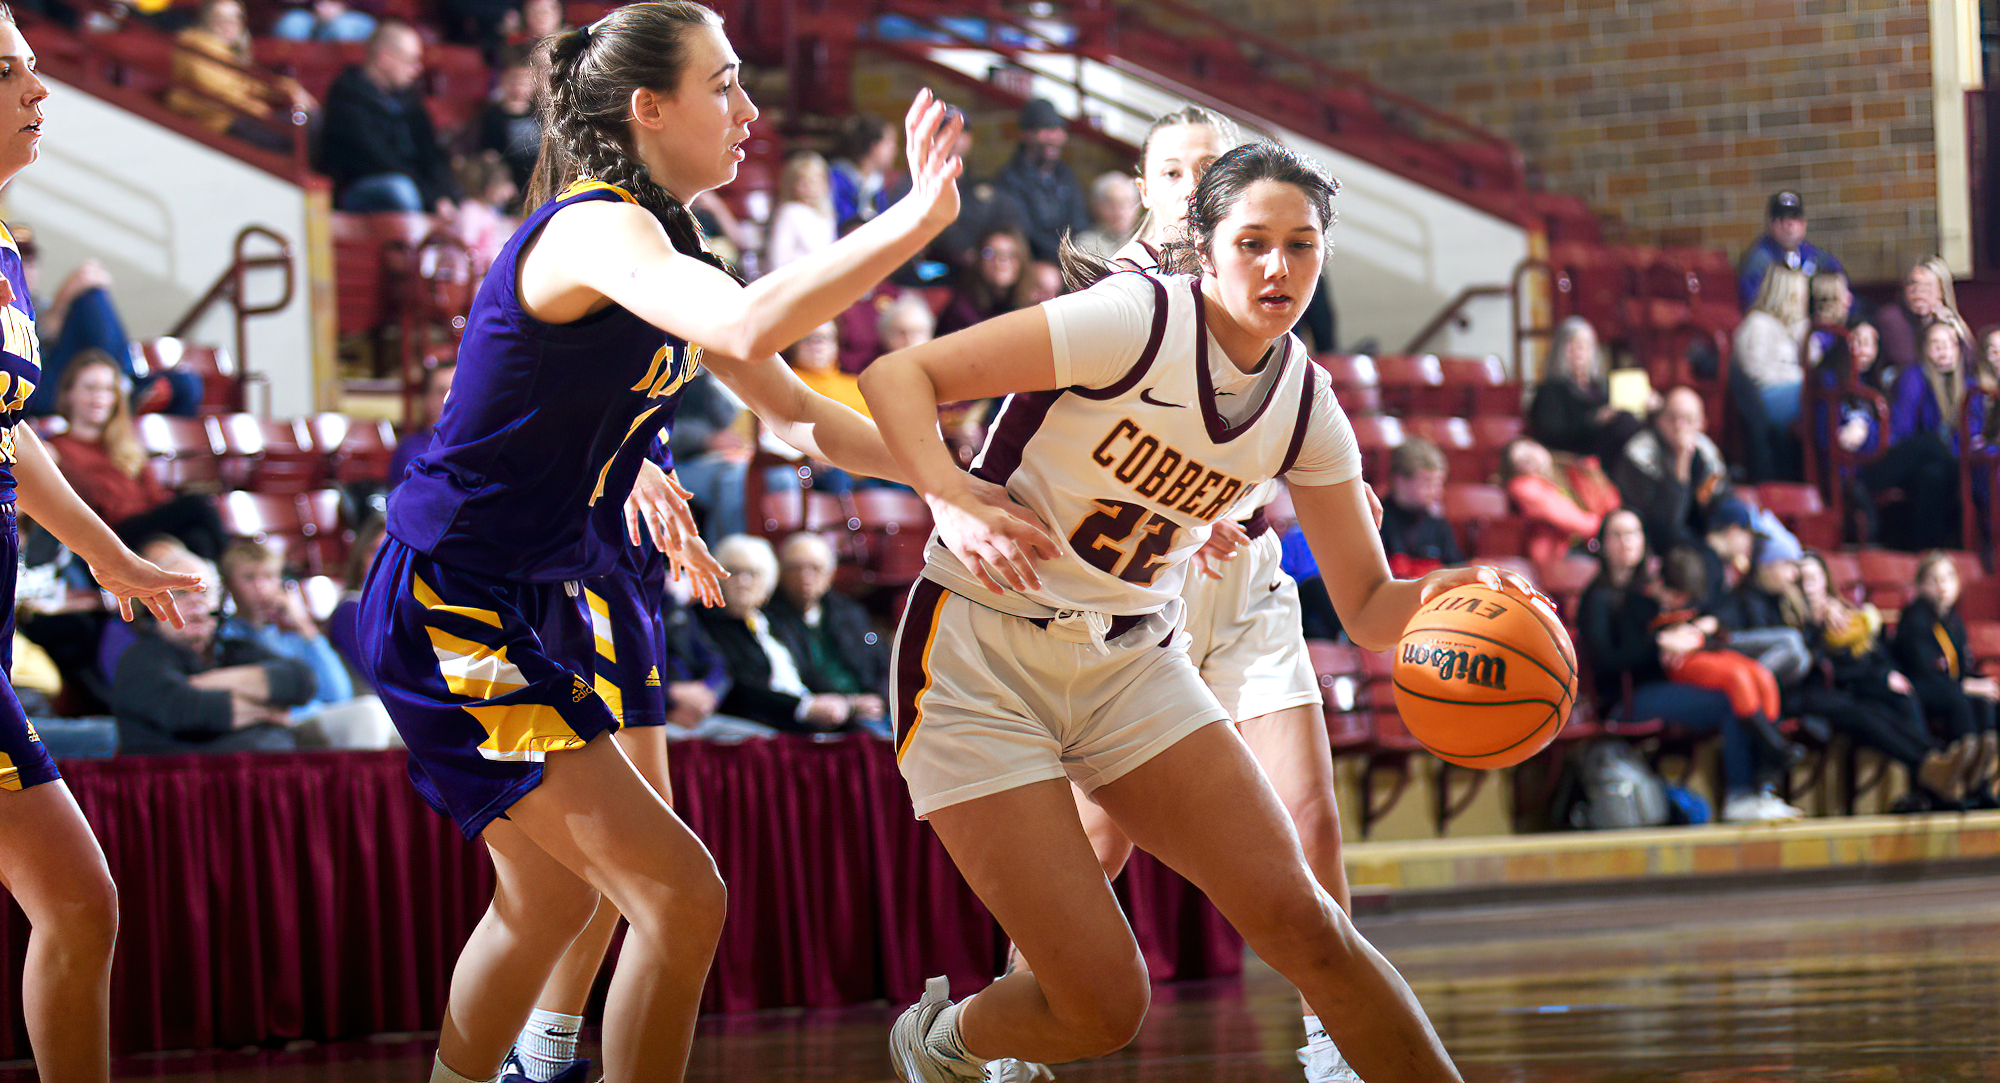 Makayla Anderson scored 11 points and had a team-high four steals and a team-high four assists in the Cobbers' 75-67 win at St. Catherine.